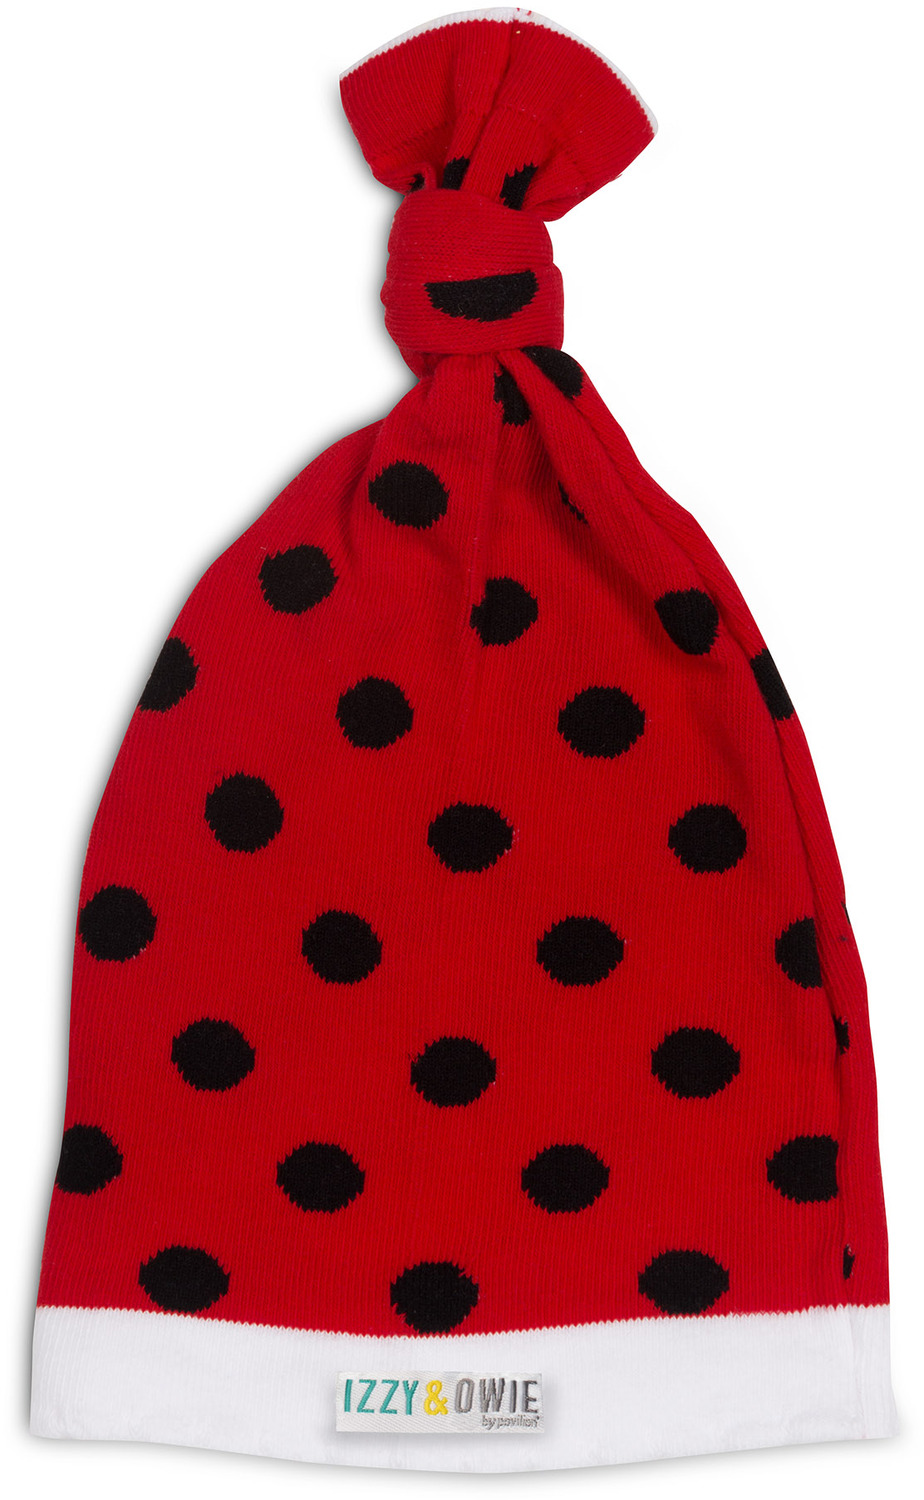 Red and Black Polka Dot by Izzy & Owie - Red and Black Polka Dot - One Size Fits All Baby Hat